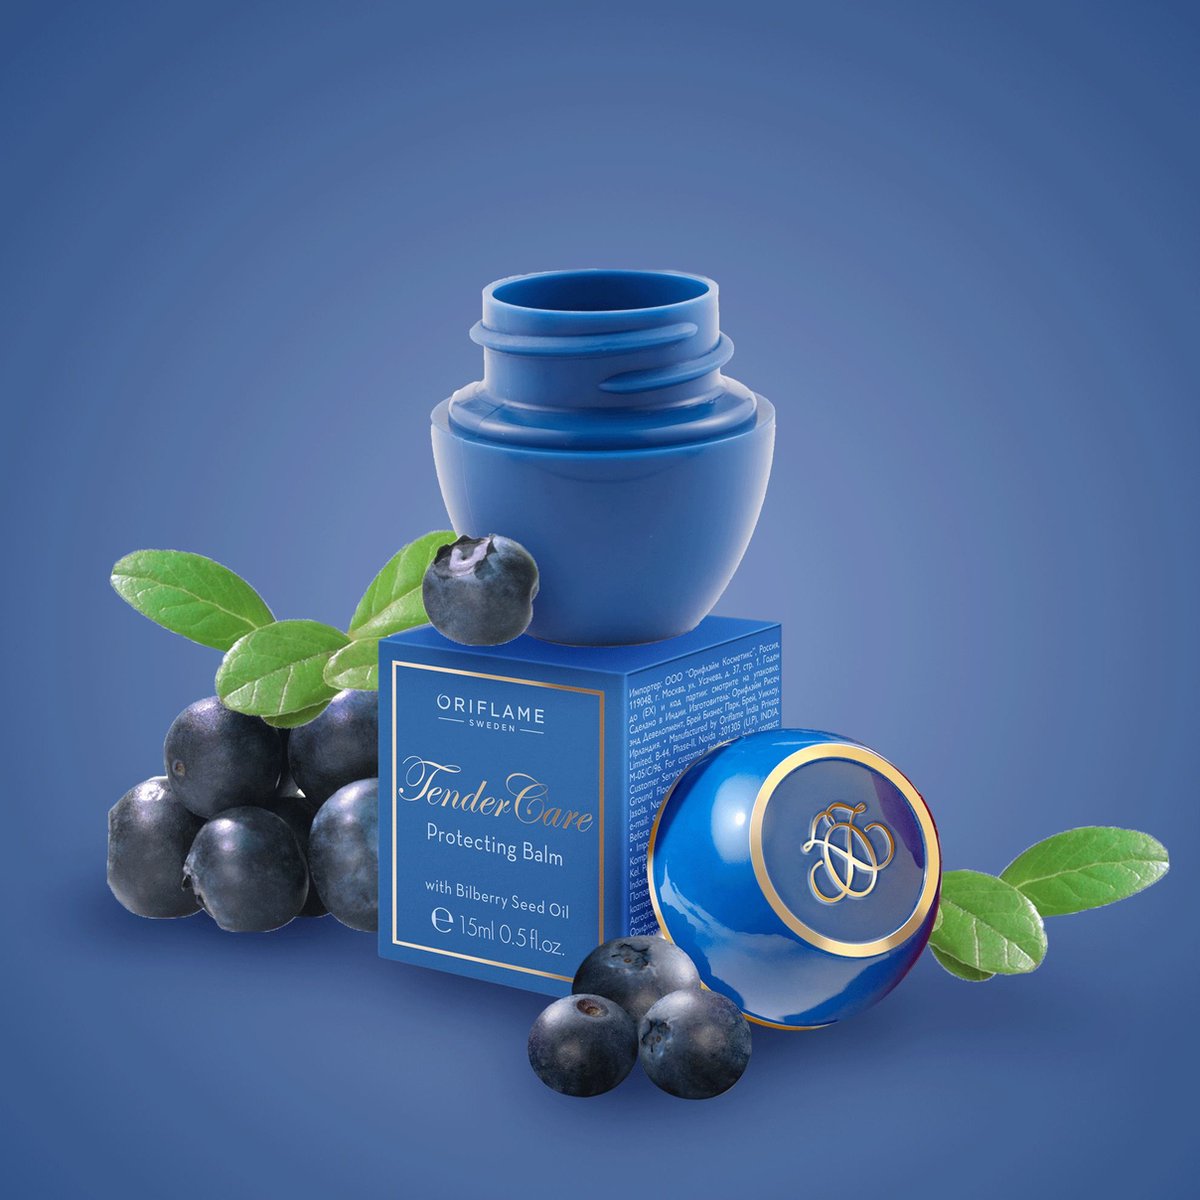 Tender Care - Protecting Balm with Bilberry Seed Oil